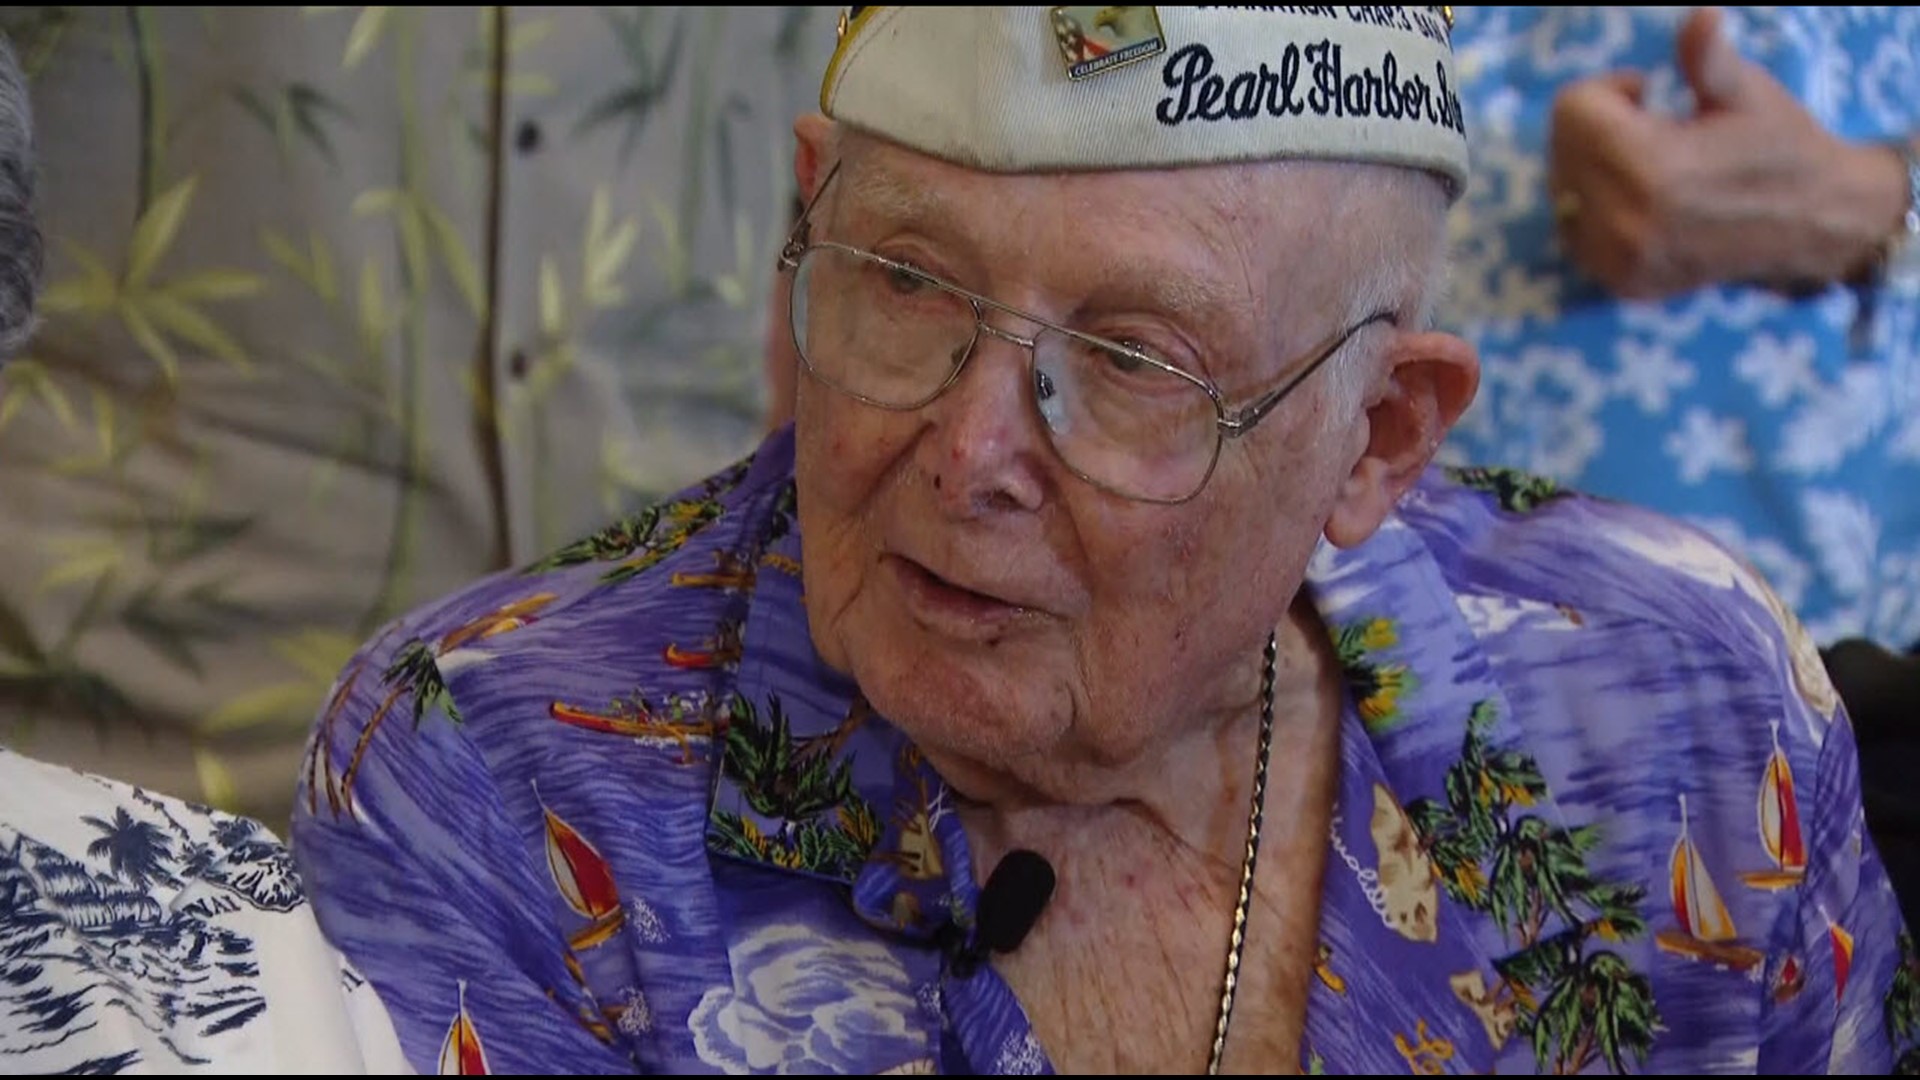 Veterans, including oldest survivor of the attack on Pearl Harbor, Clayton Schenkelberg, gather to remember the 1944 event that changed their lives.